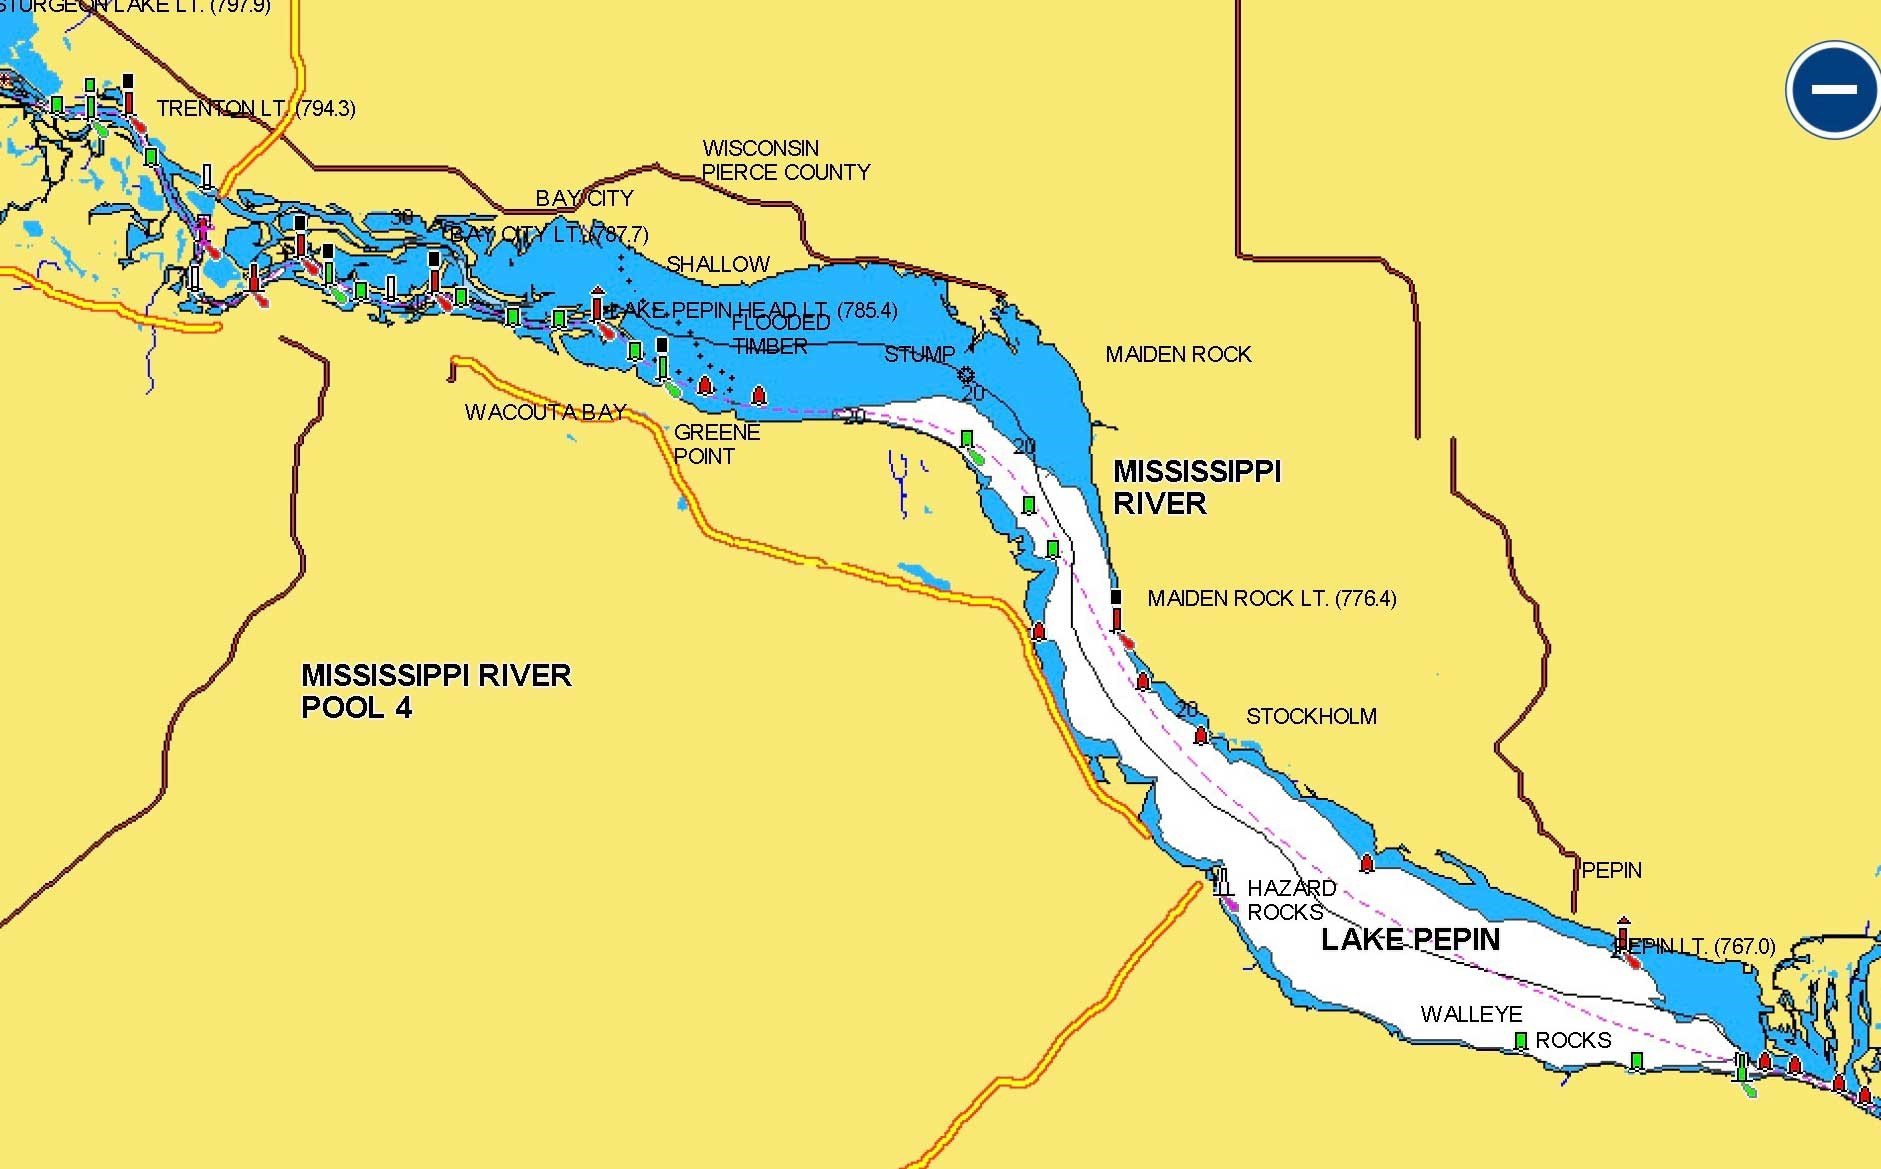 Lake Pepin on the Mississippi River, lake map.